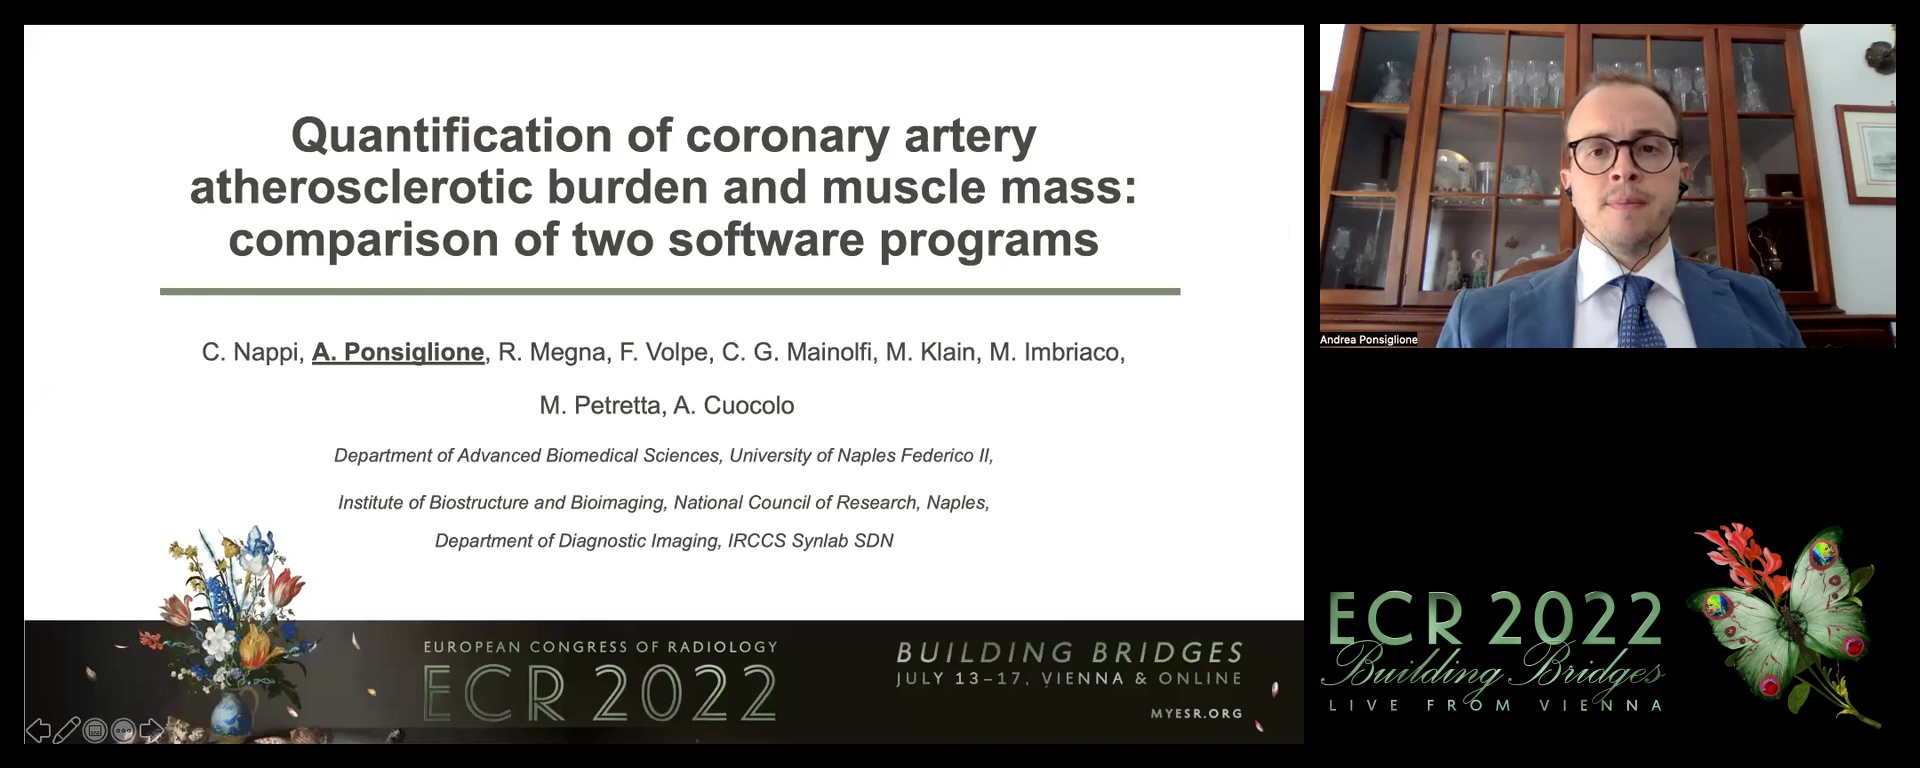 Quantification of coronary artery atherosclerotic burden and muscle mass: comparison of two software programs - Andrea Ponsiglione, Napoli / IT